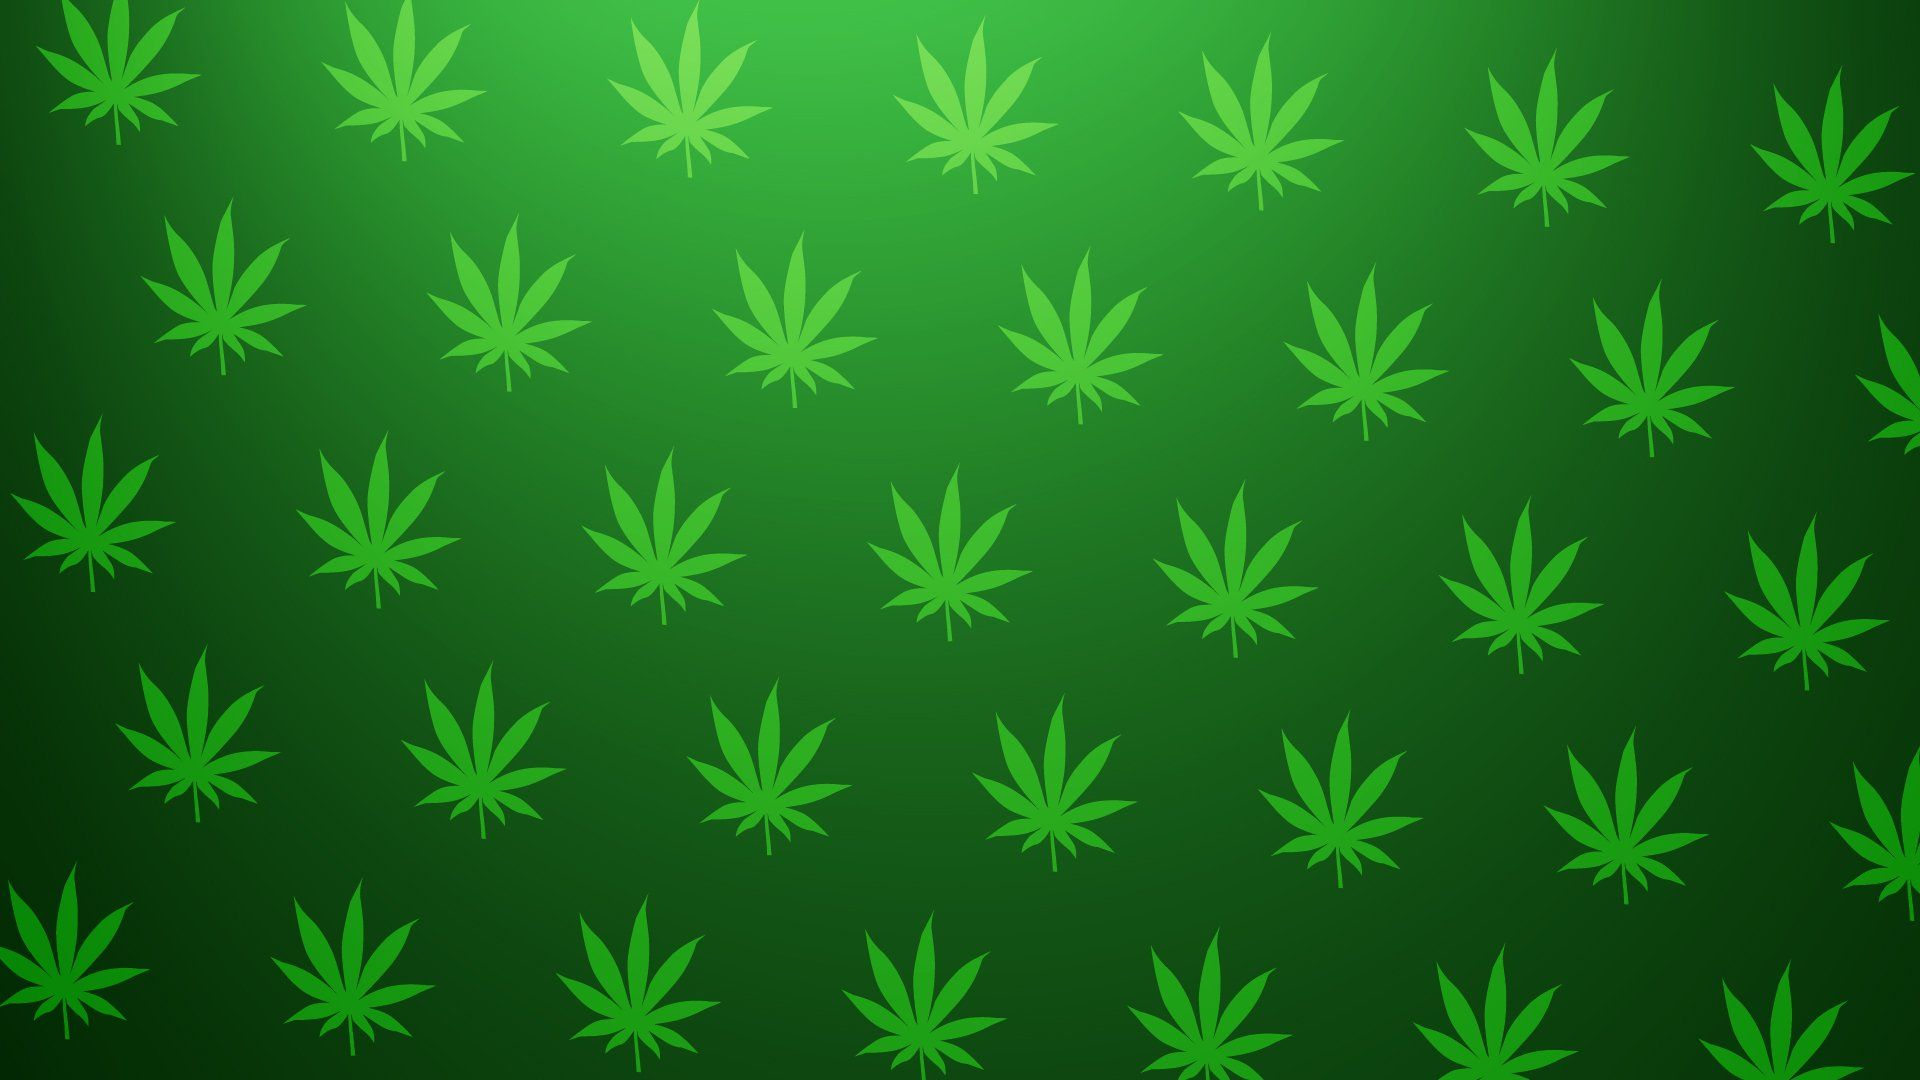 Weed Twitter Background. Weed Girl Wallpaper, Popular Weed Wallpaper and Funny Weed Background